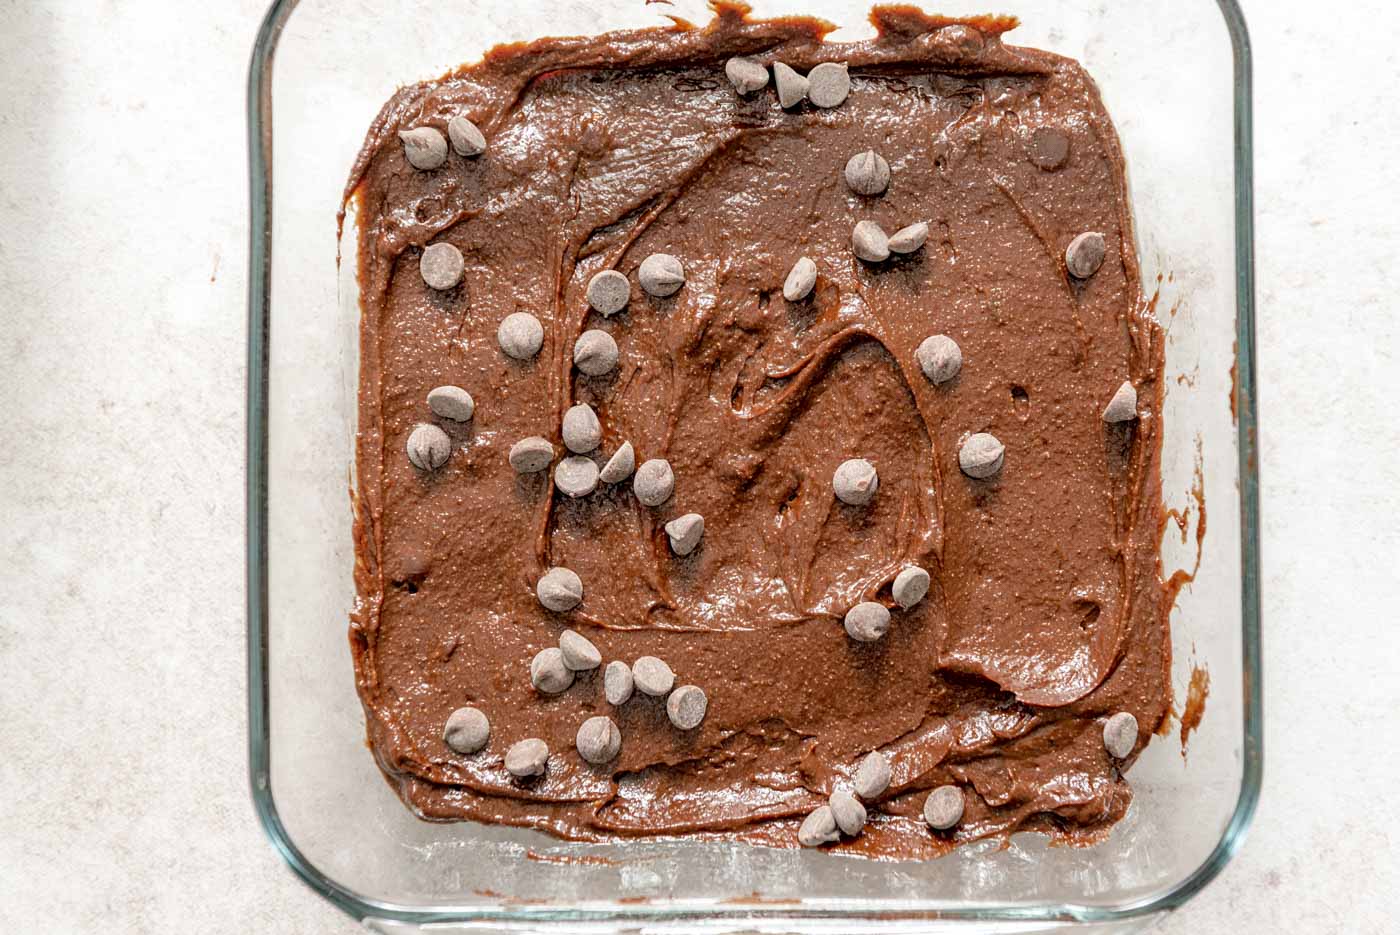 Raw brownie batter topped with chocolate chips in a glass baking dish.